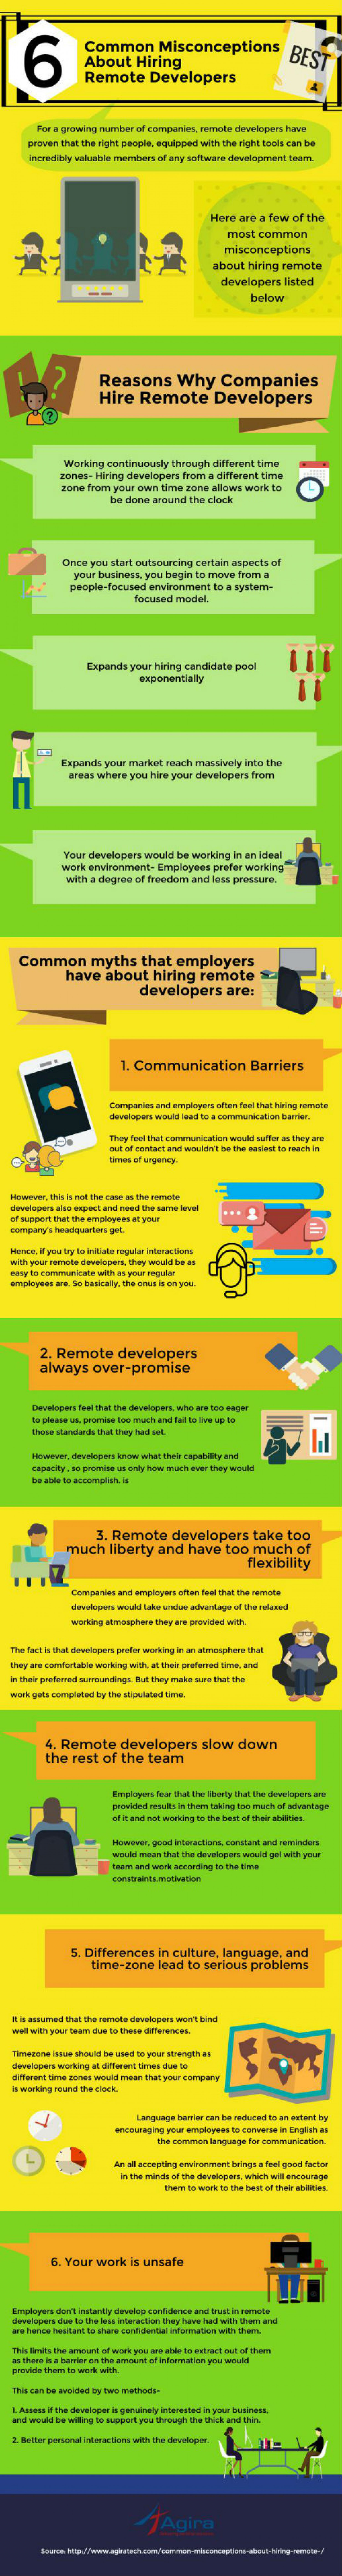 Most Common Misconceptions About Hiring Remote Developers Infographic